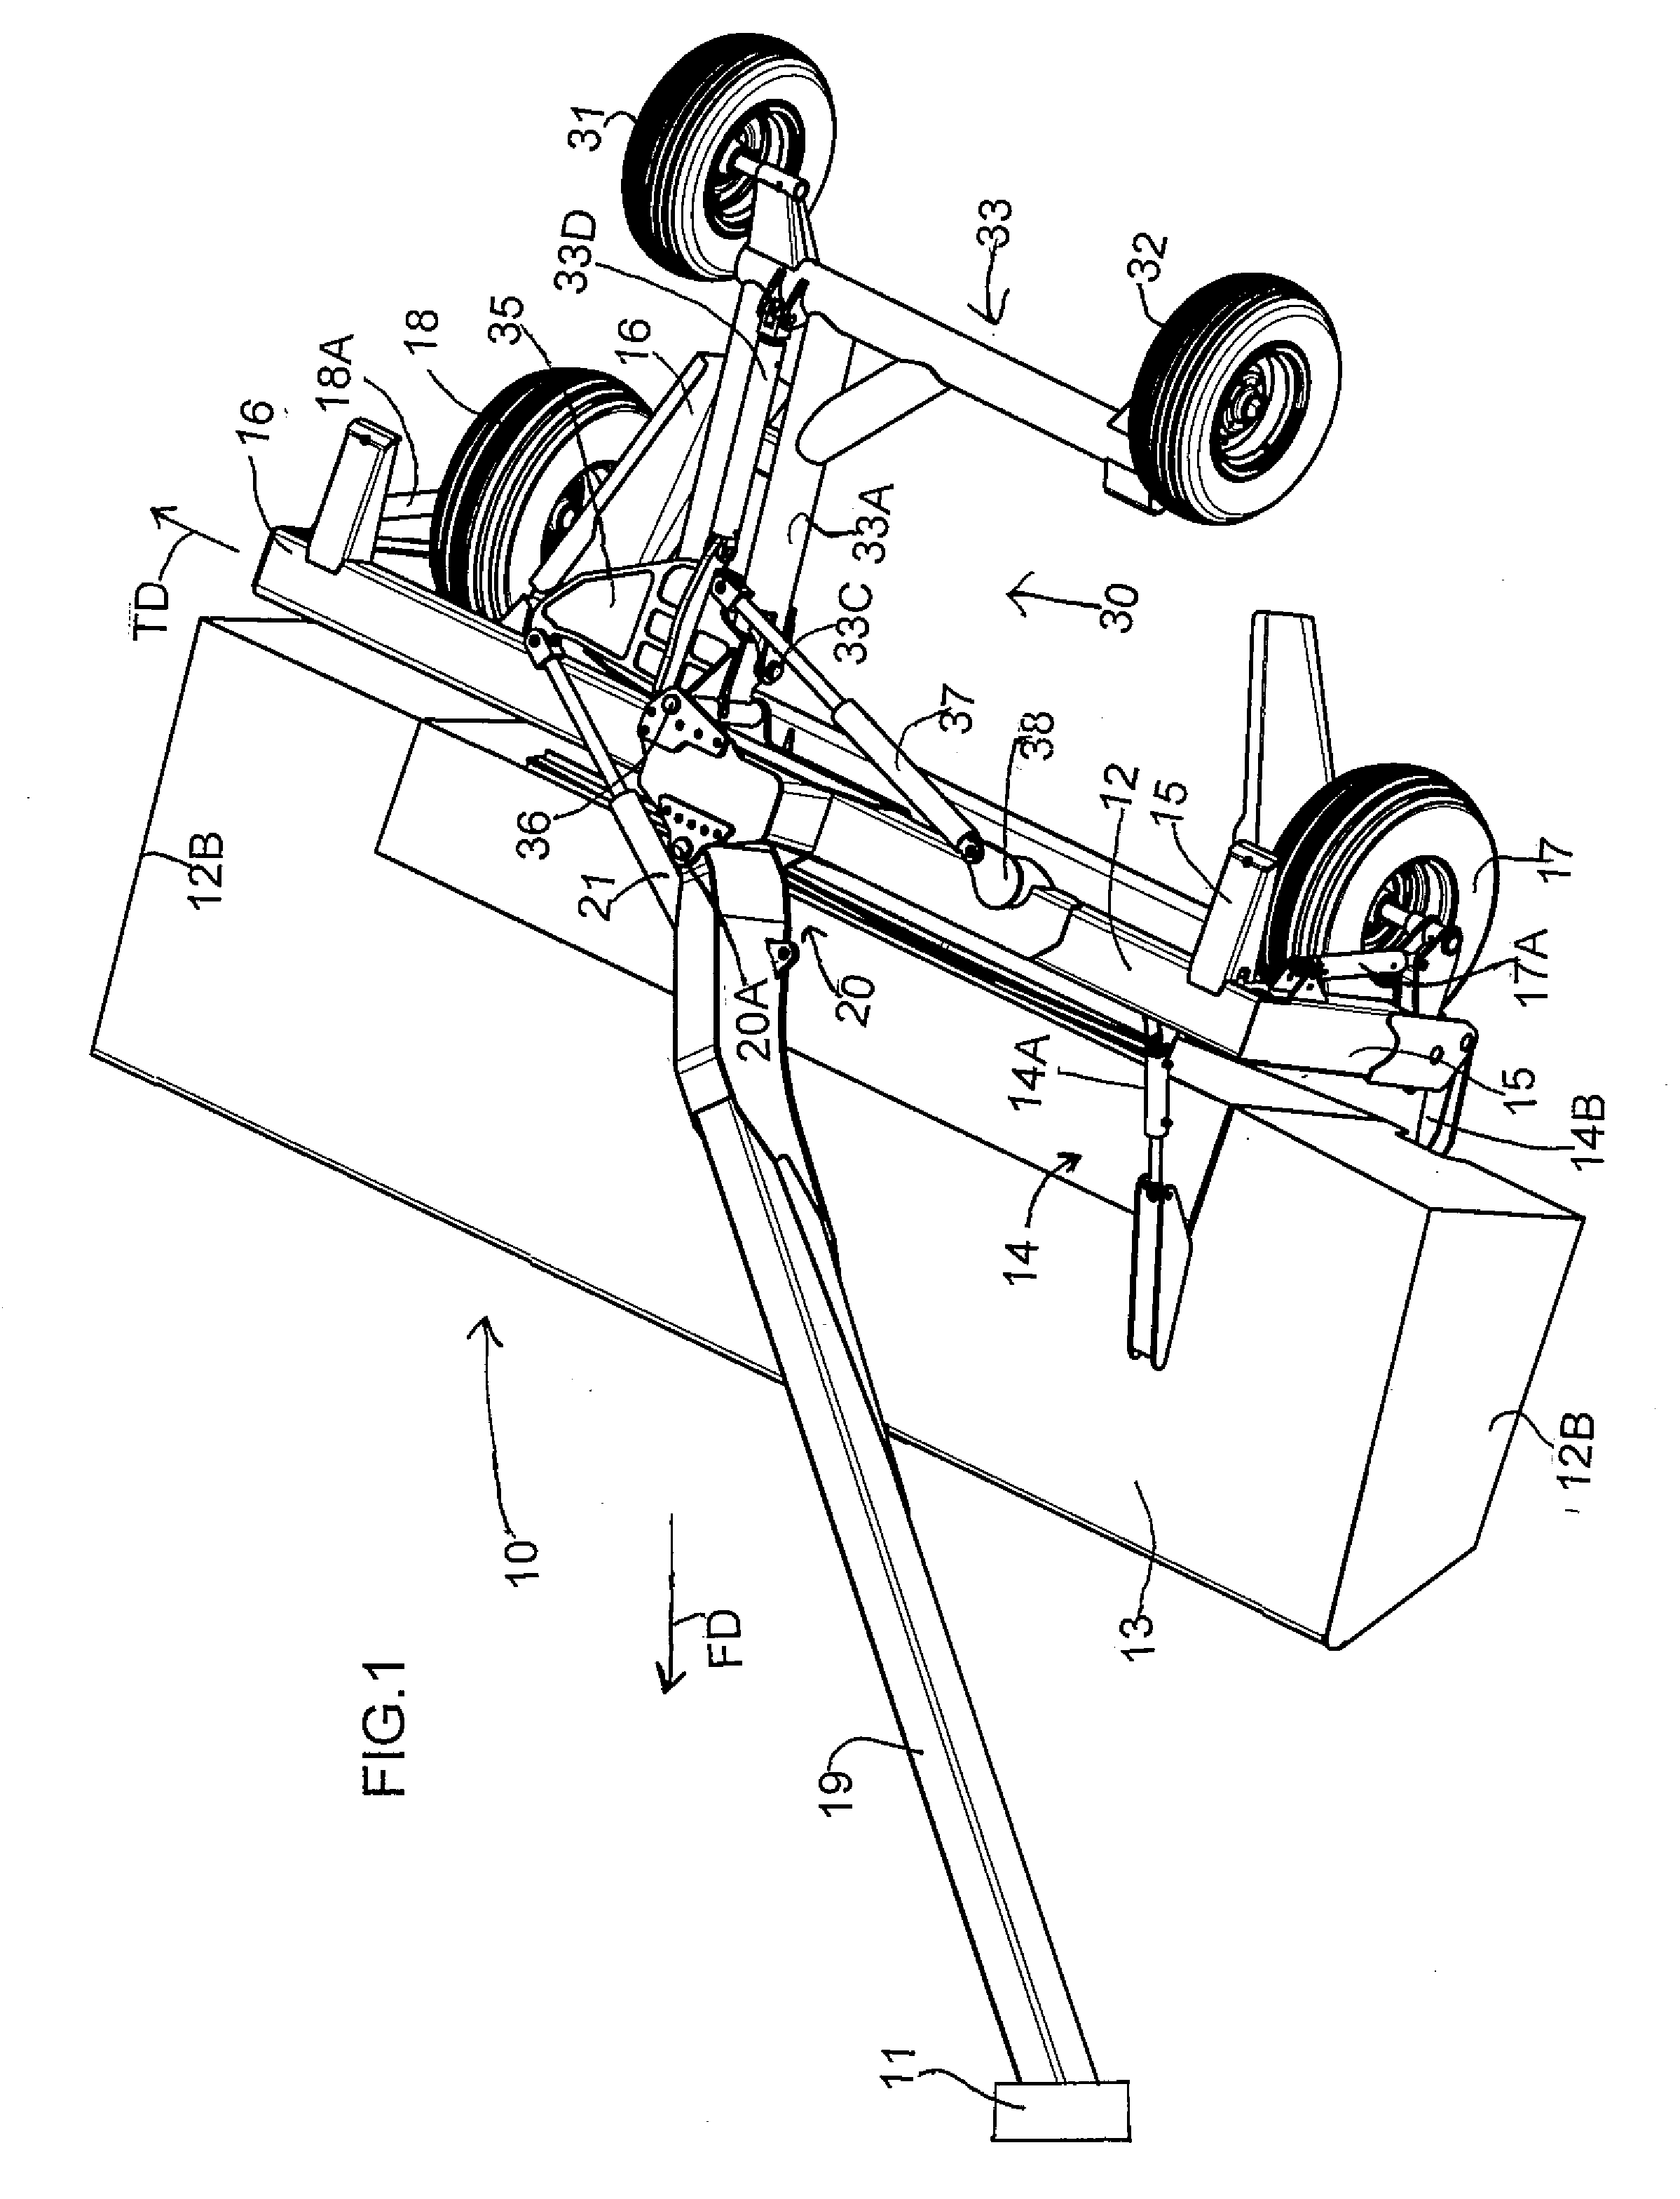 Pull-type crop harvesting machine transport system including a swath protection shield